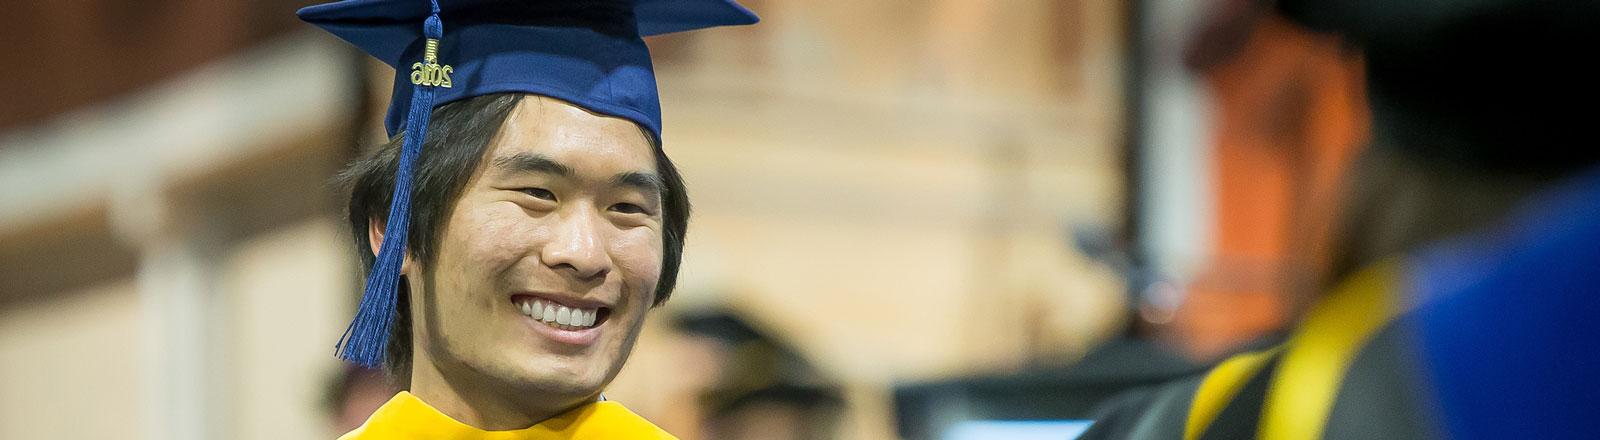 International student at commencement